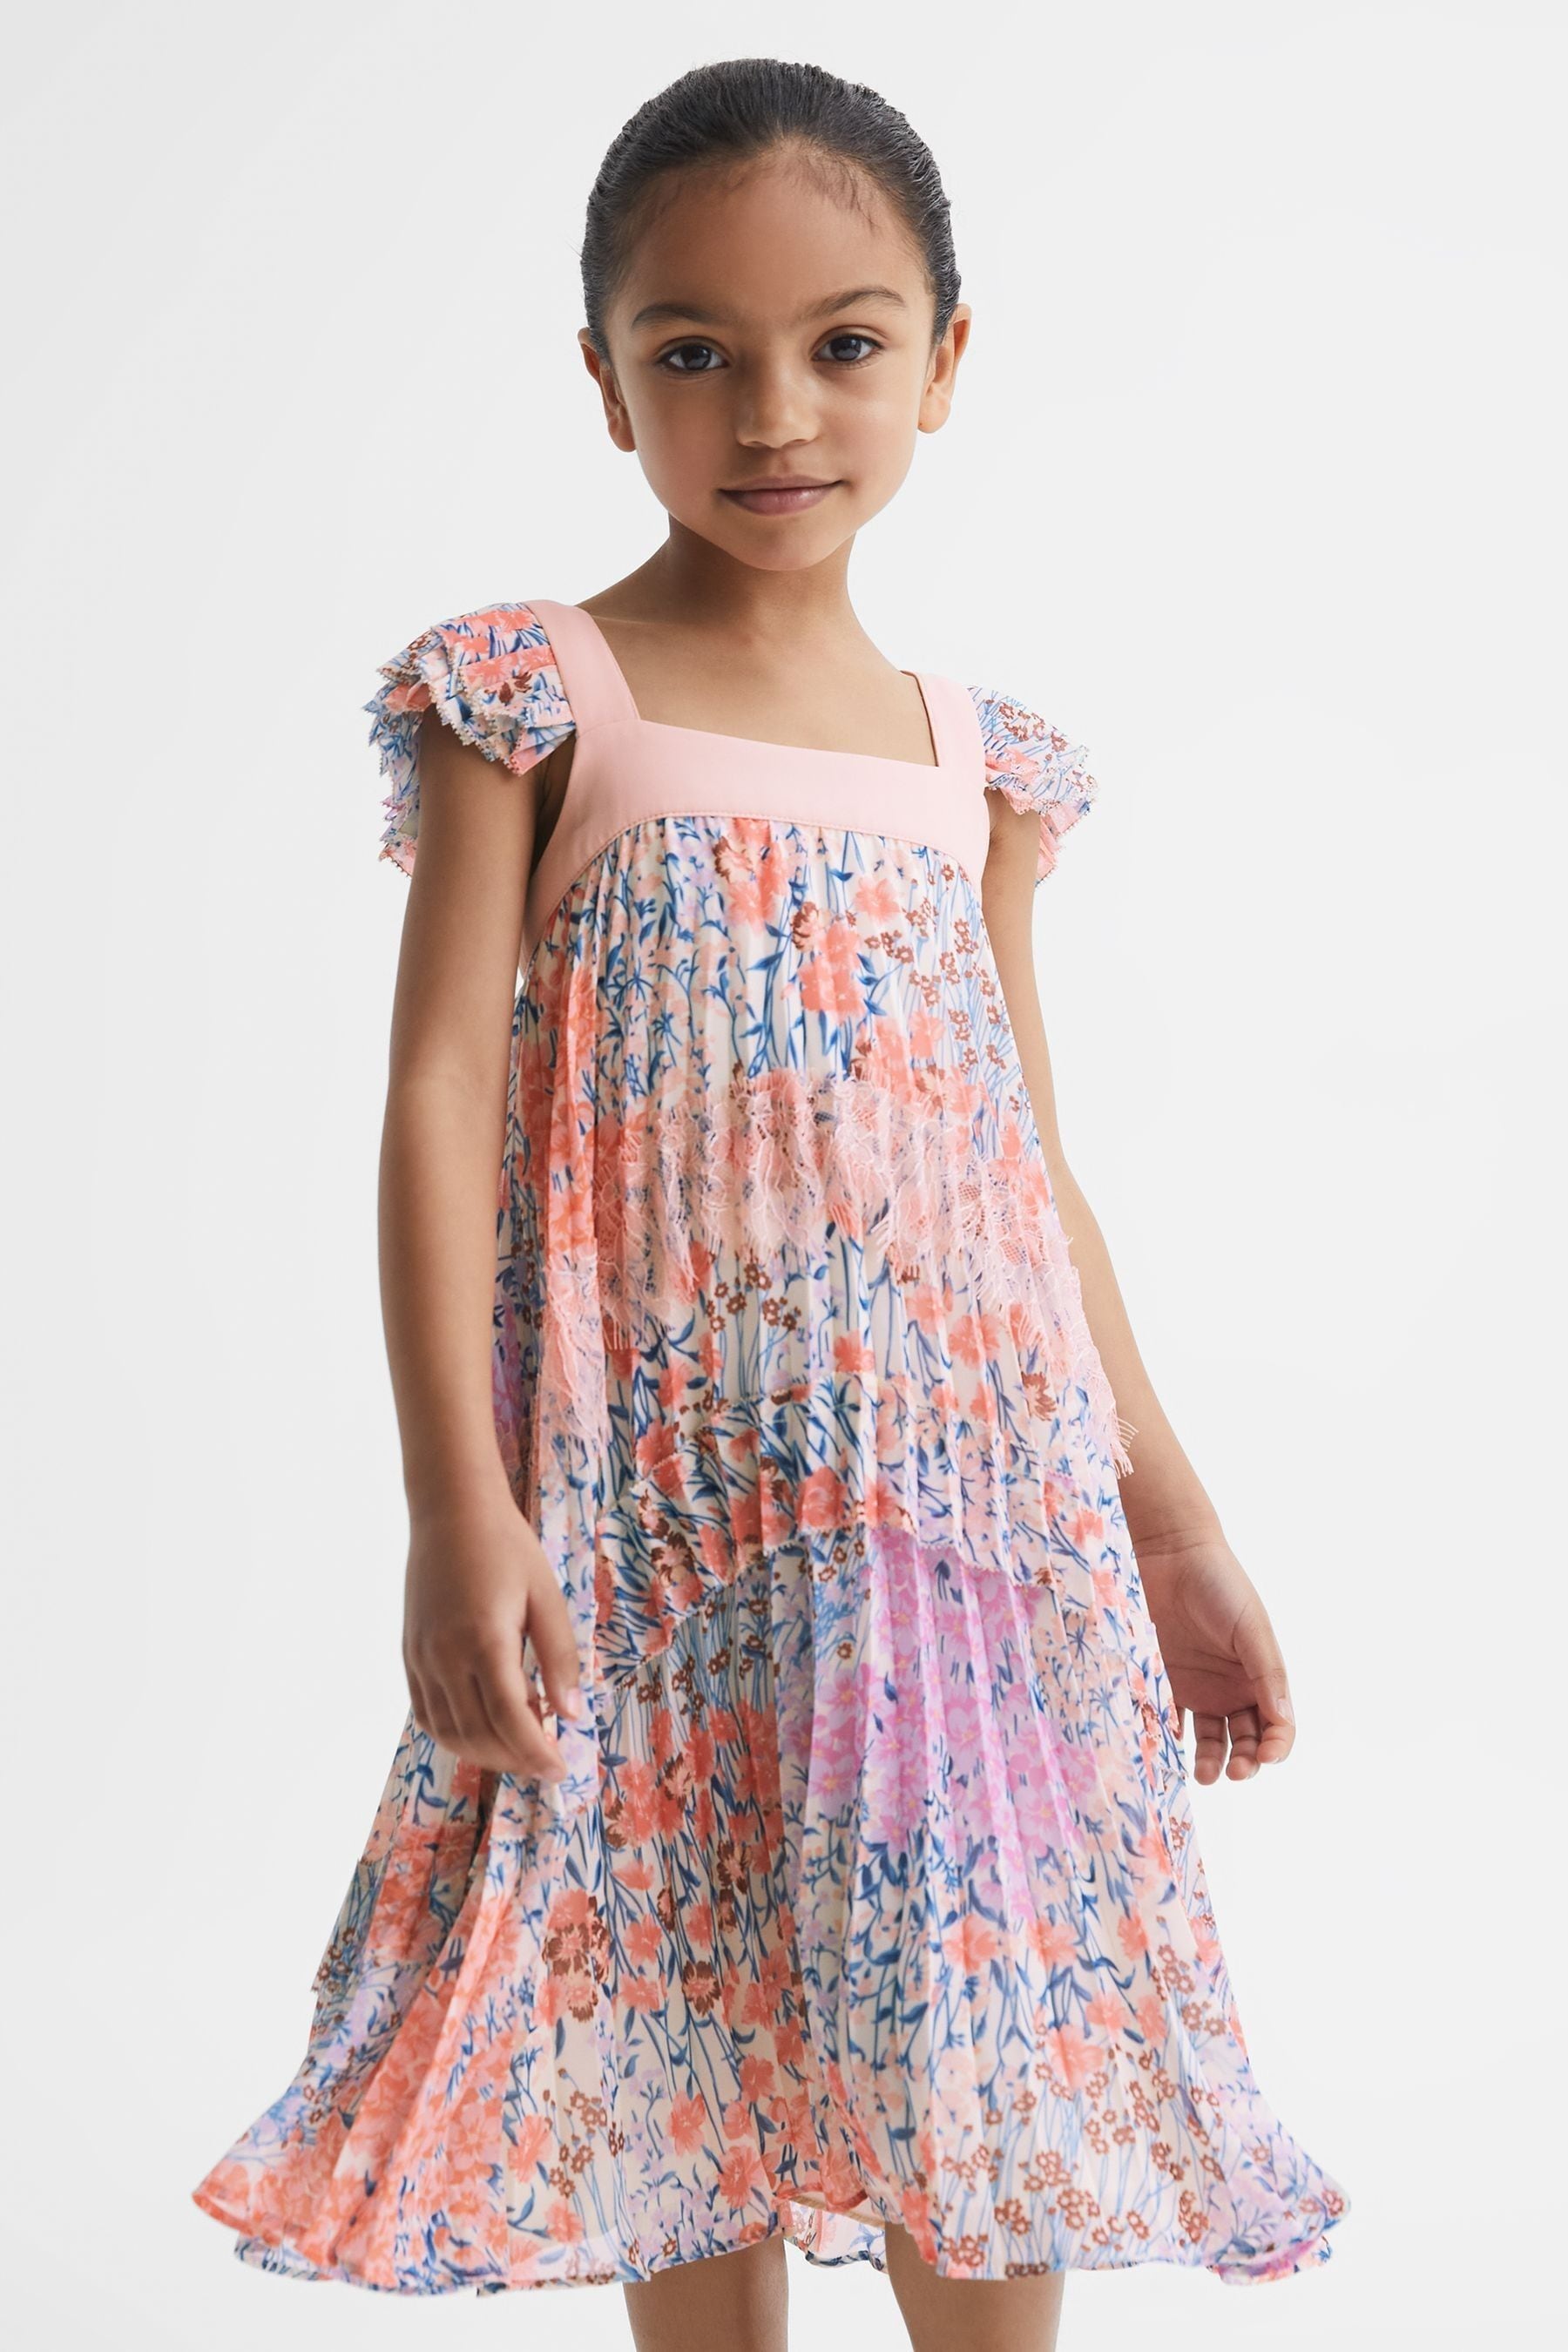 Reiss Kids' Aster - Pink Print Aster Junior Floral Printed Pleated Dress, Age 6-7 Years